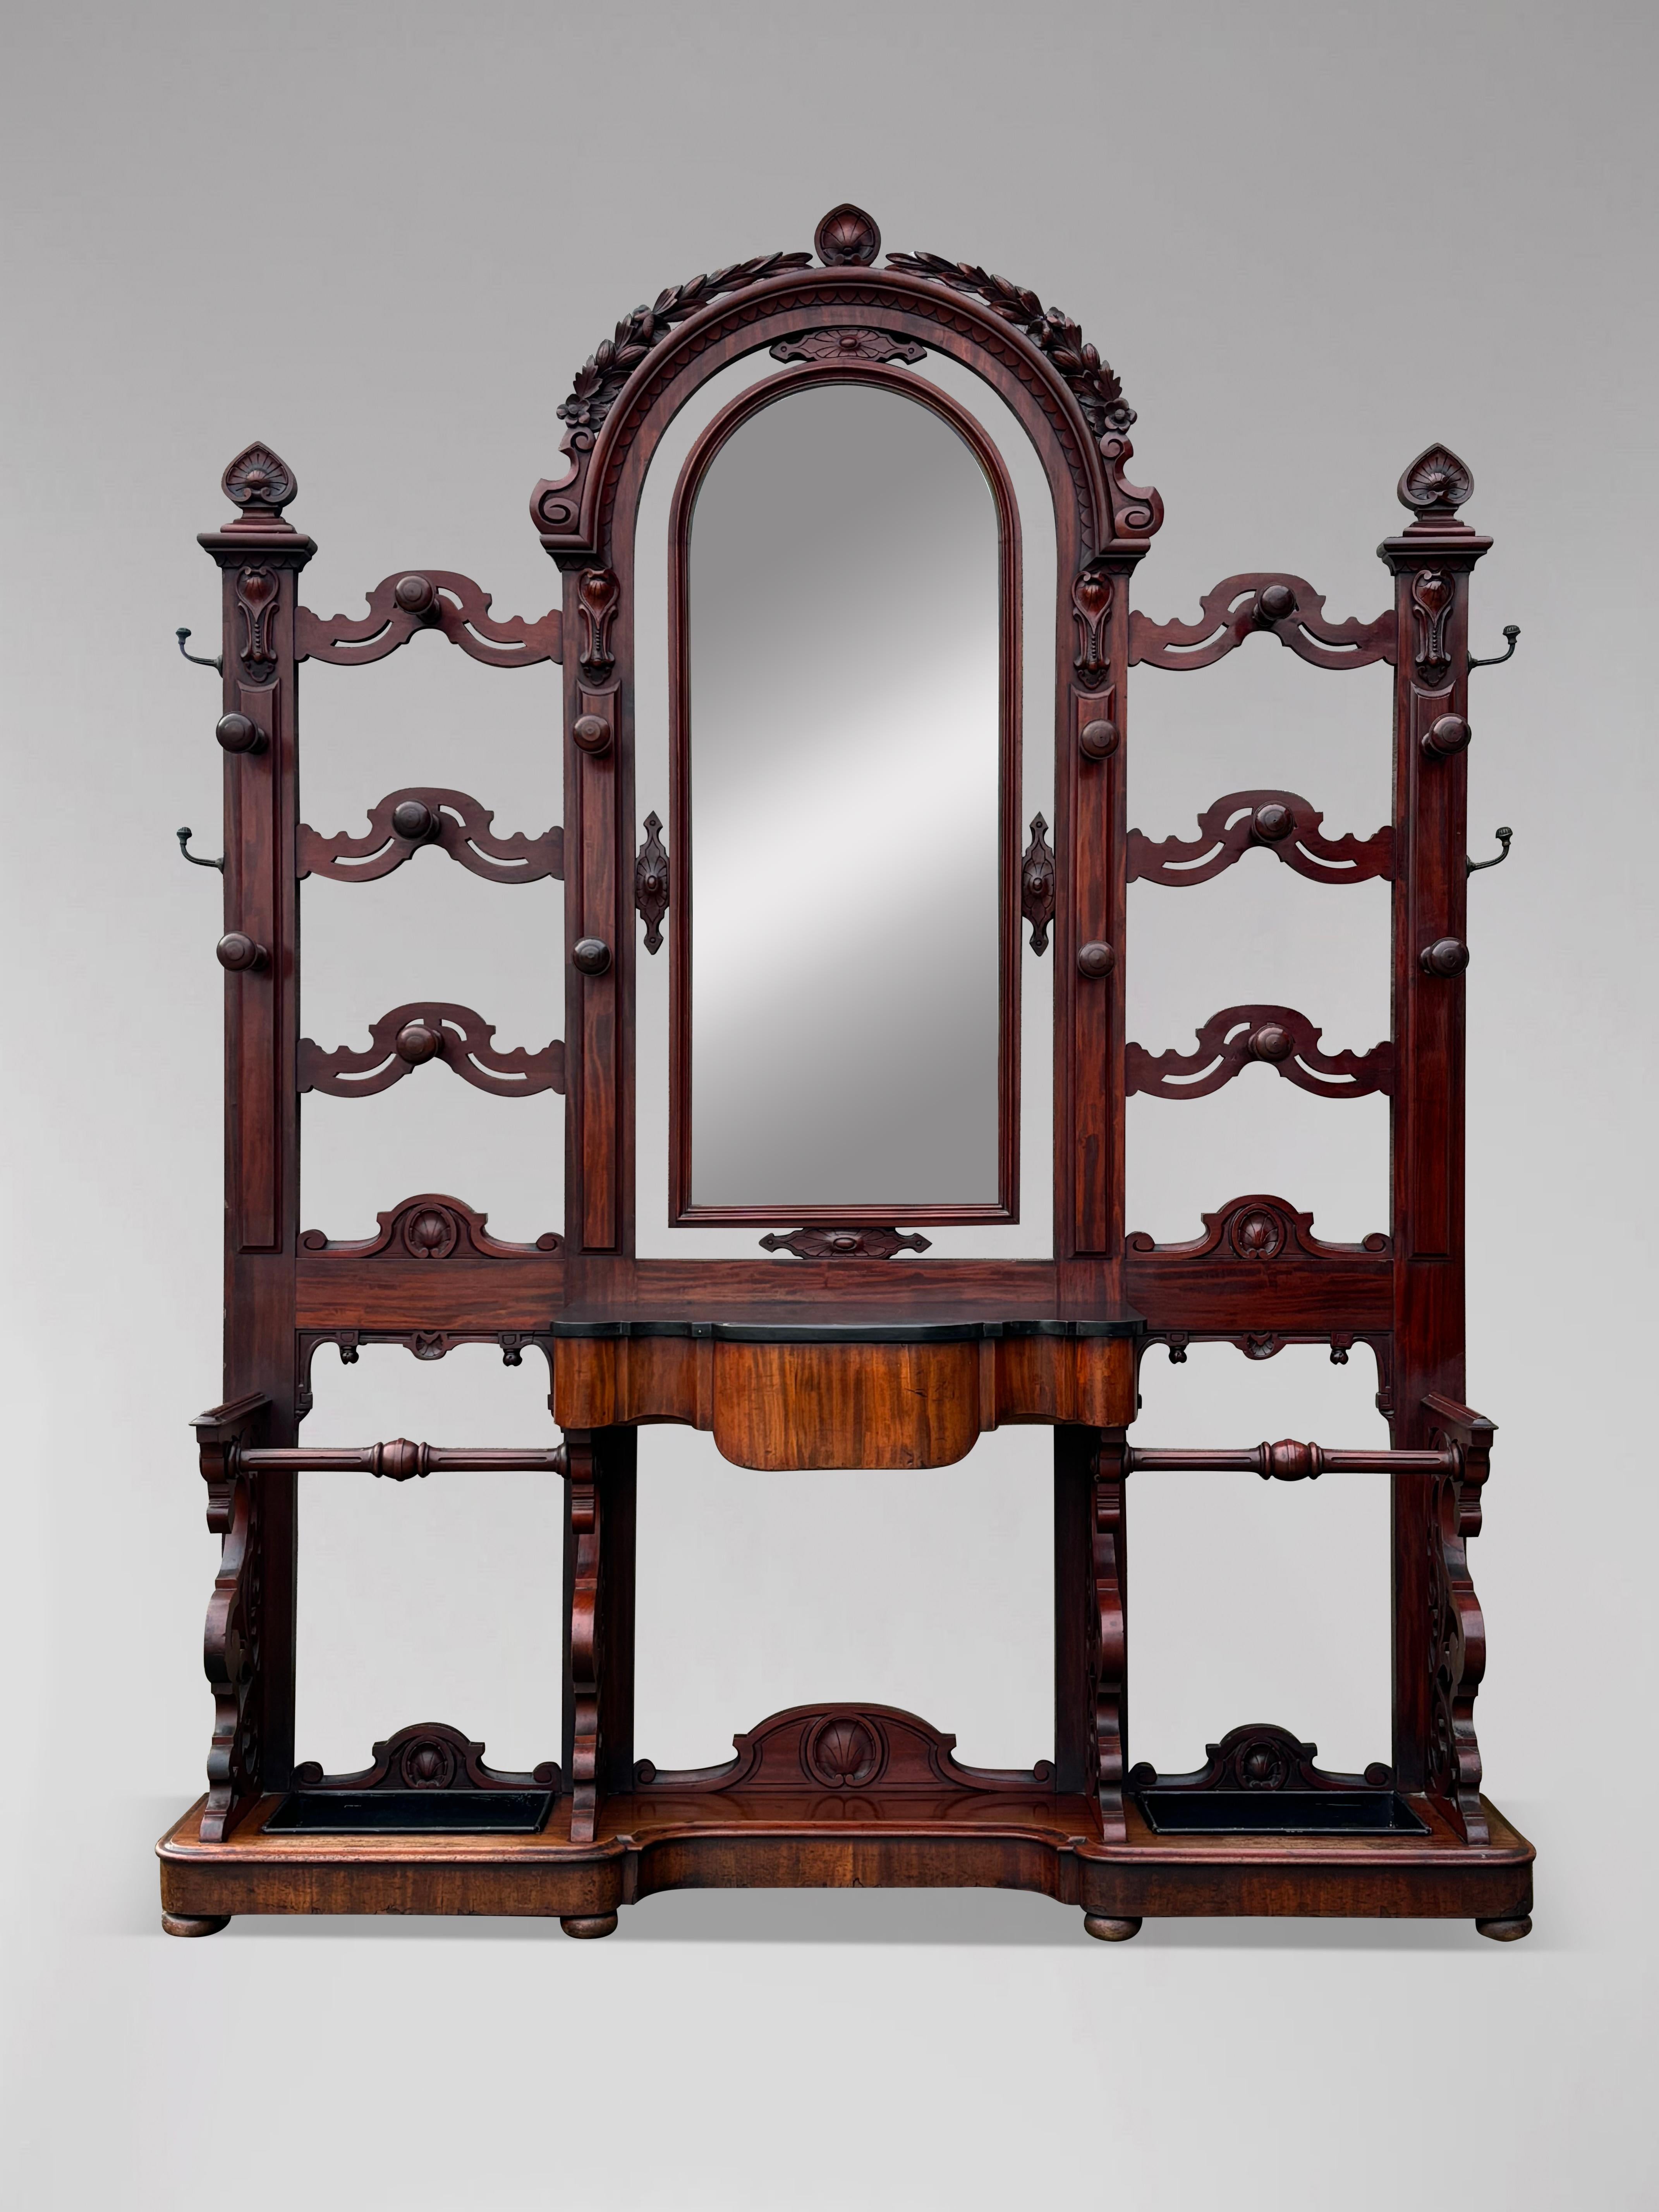 An outstanding 19th century, Victorian period hall stand in solid mahogany with big arched frame, carved detailing, the original marble, 14 original turned mahogany hat and coat supports, 4 brass hooks to the sides and the original centralised